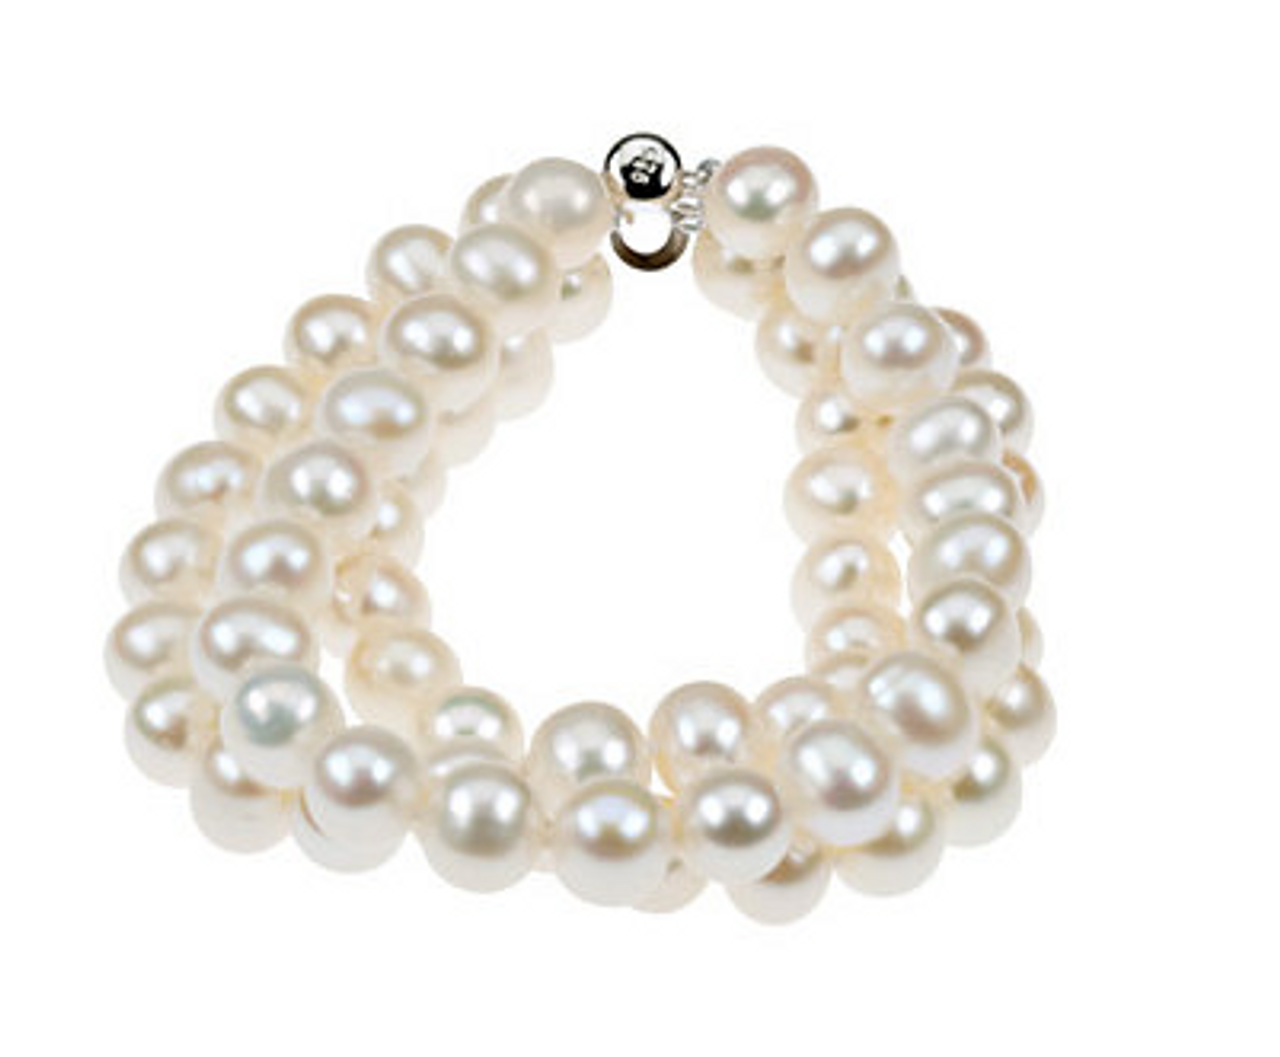 Gorgeous Sterling Silver Toree 3-Row Pearl Strand Bracelet 7.25